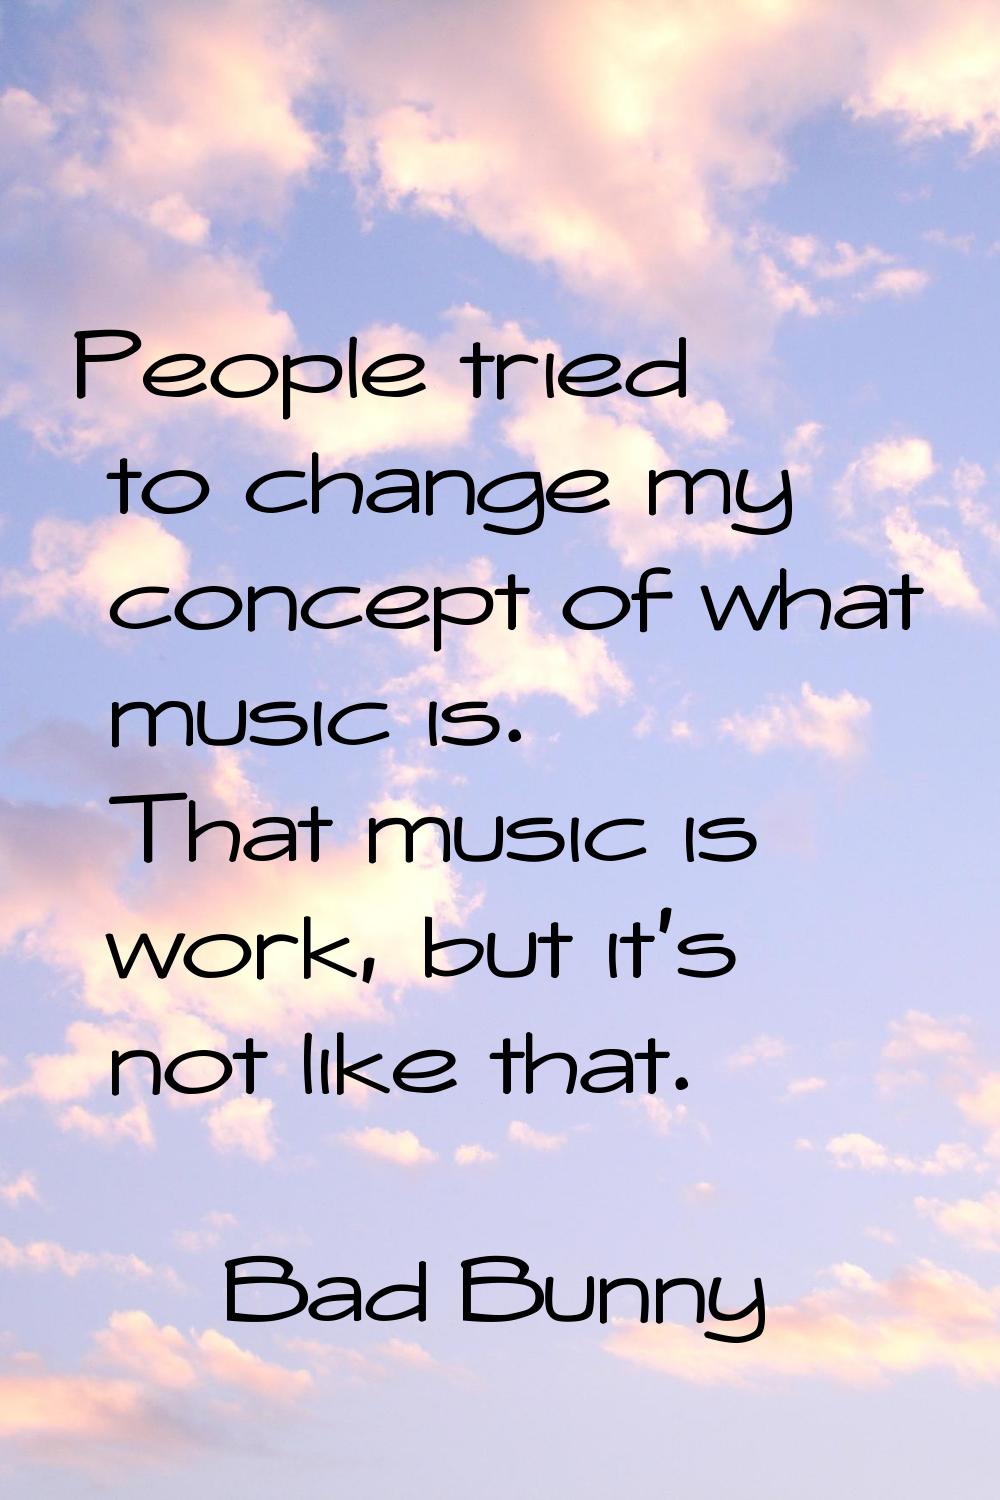 People tried to change my concept of what music is. That music is work, but it's not like that.